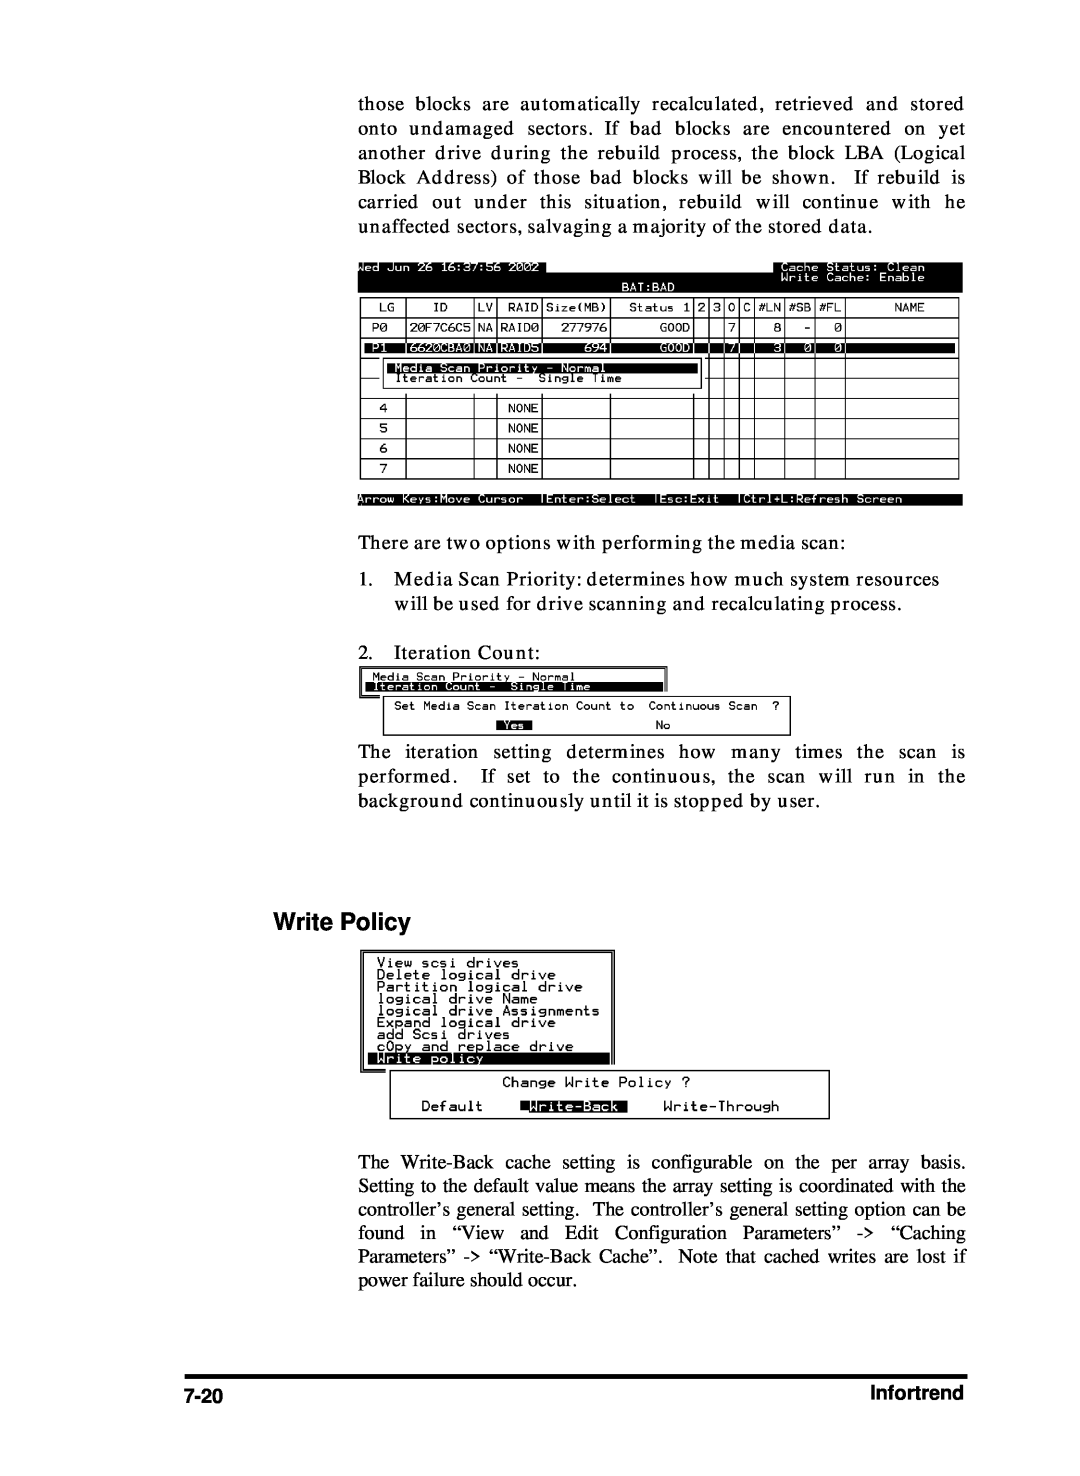 Compaq Infortrend manual Iteration Count, Write Policy 